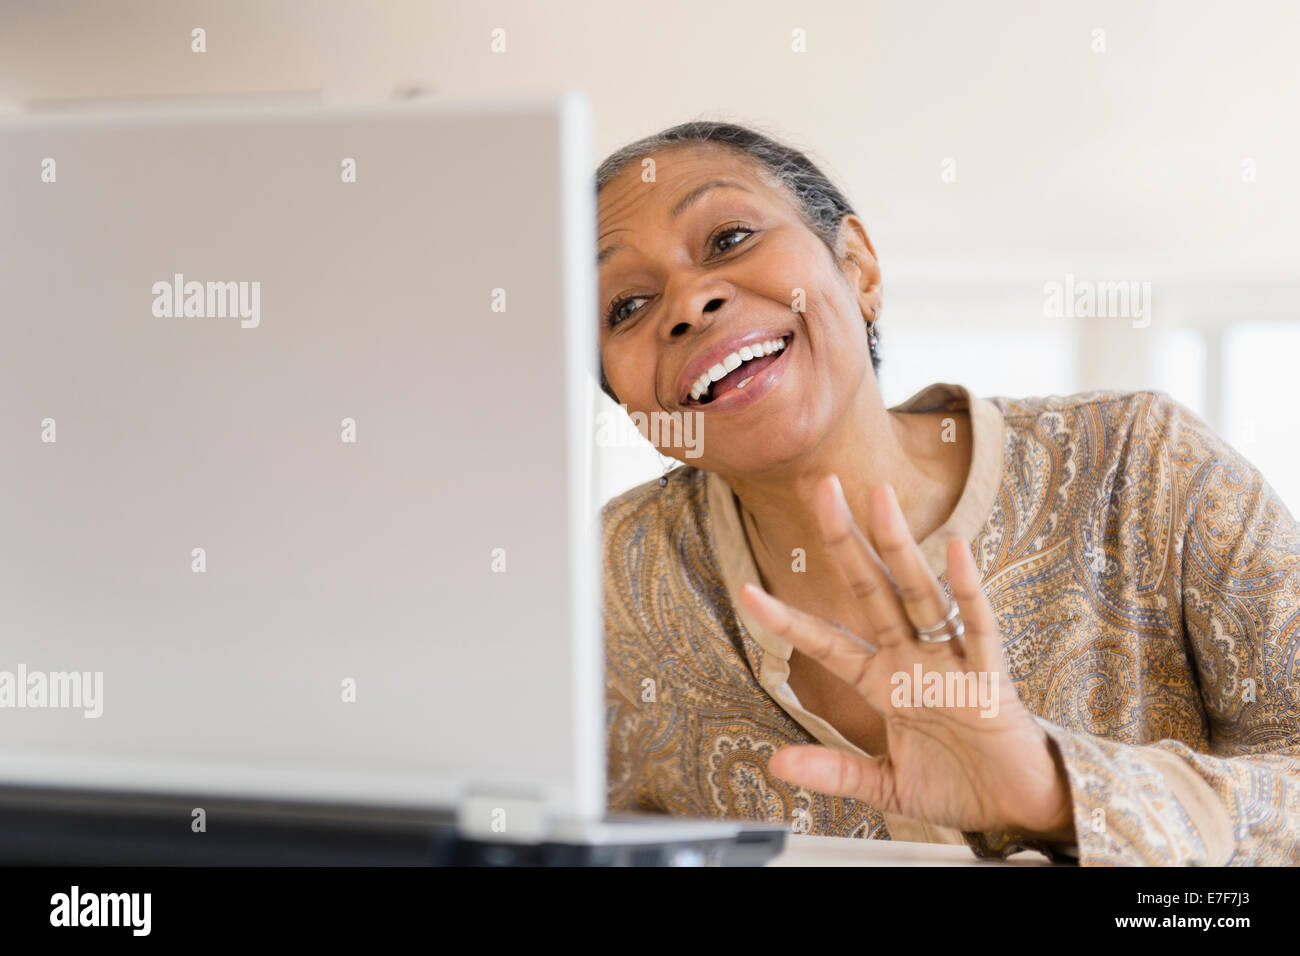 Mixed race woman using laptop at table Stock Photo